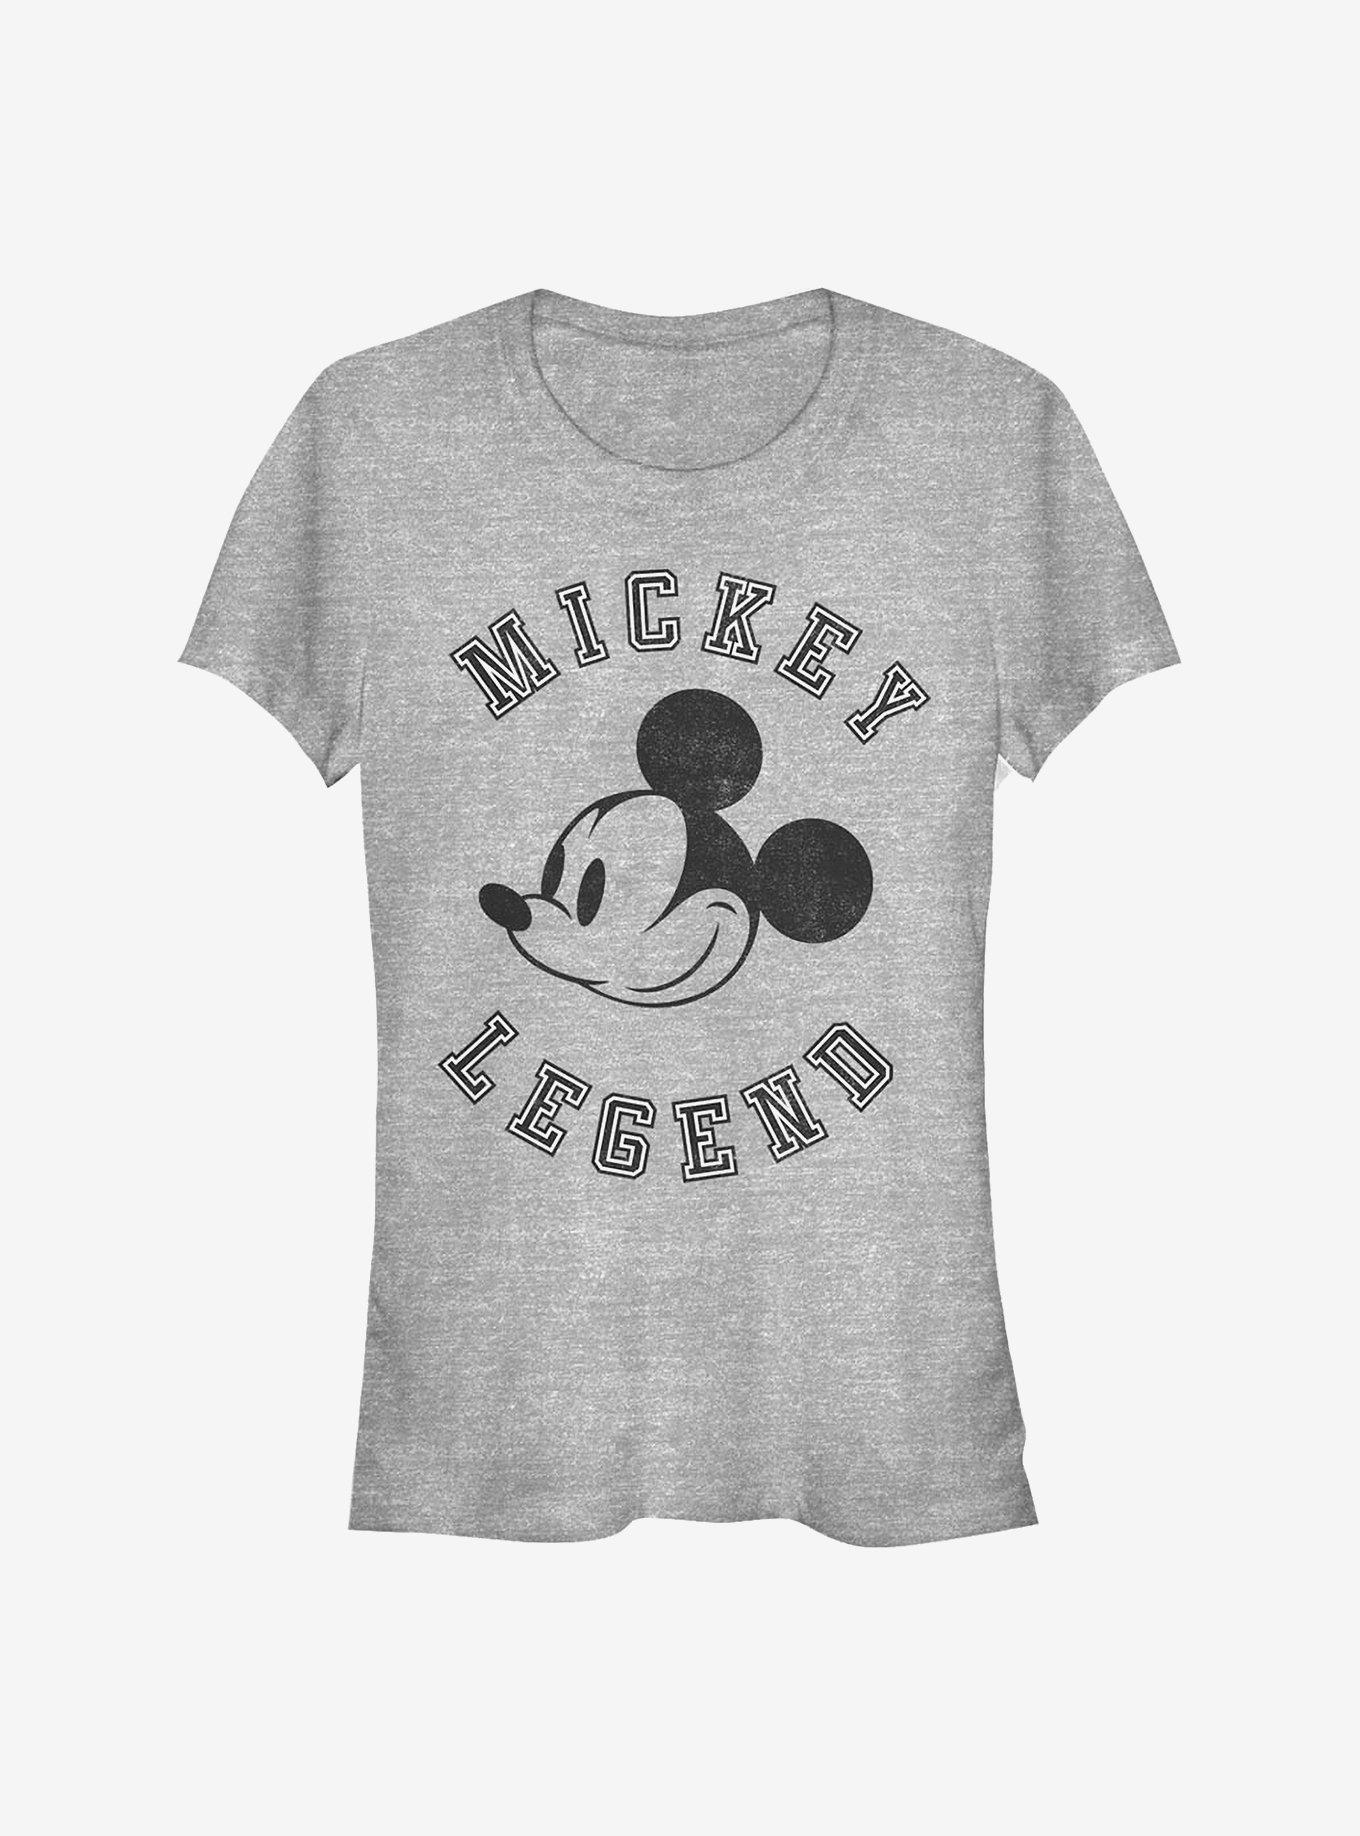 Disney Mickey Mouse Mickey Legend Girls T-Shirt, ATH HTR, hi-res